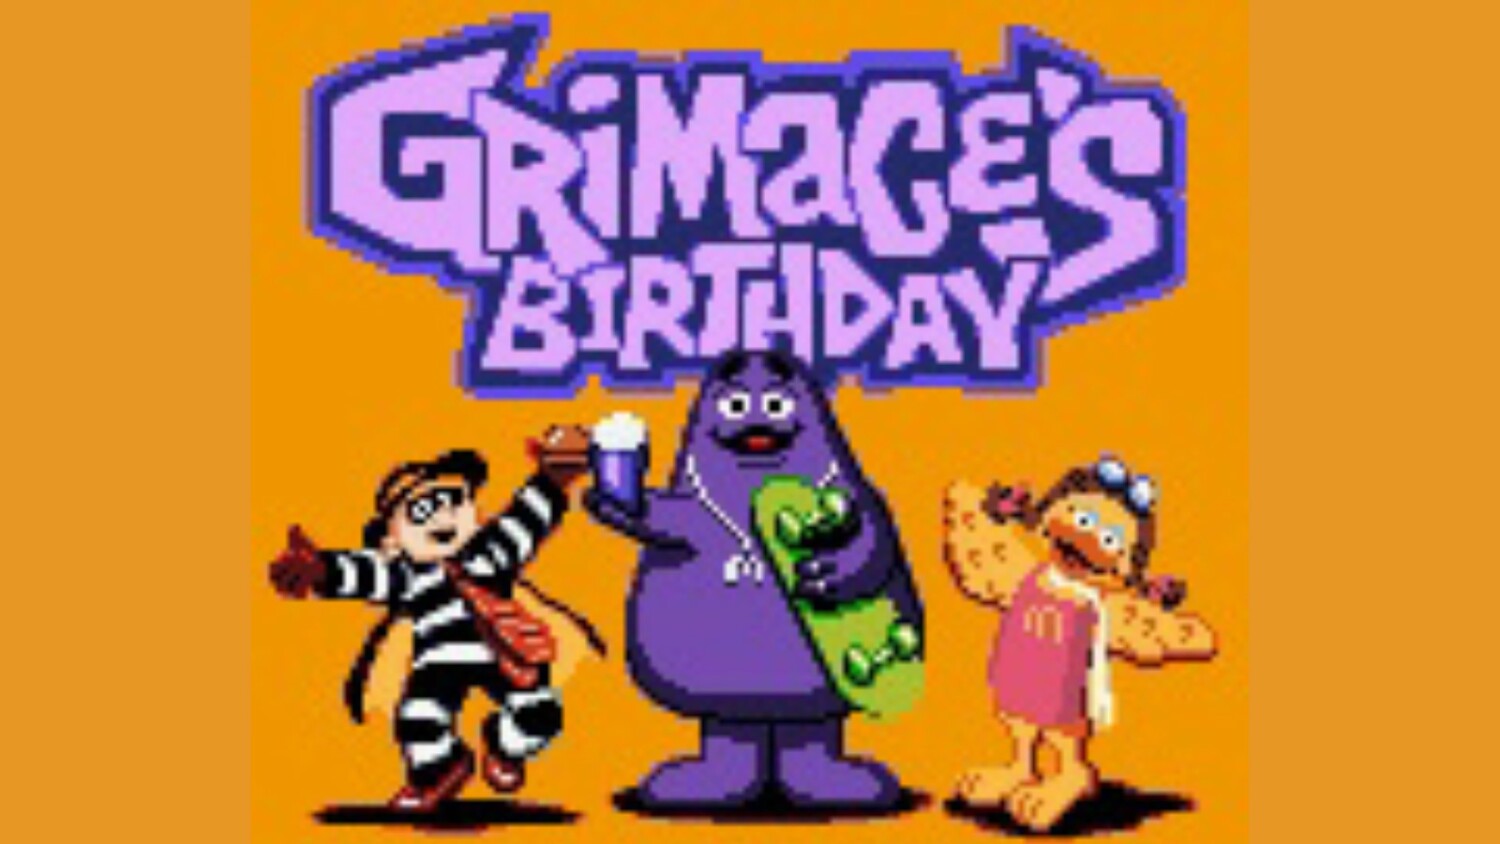 Random Mcdonald’s Releases “Grimace’s Birthday” For The Game Boy Color